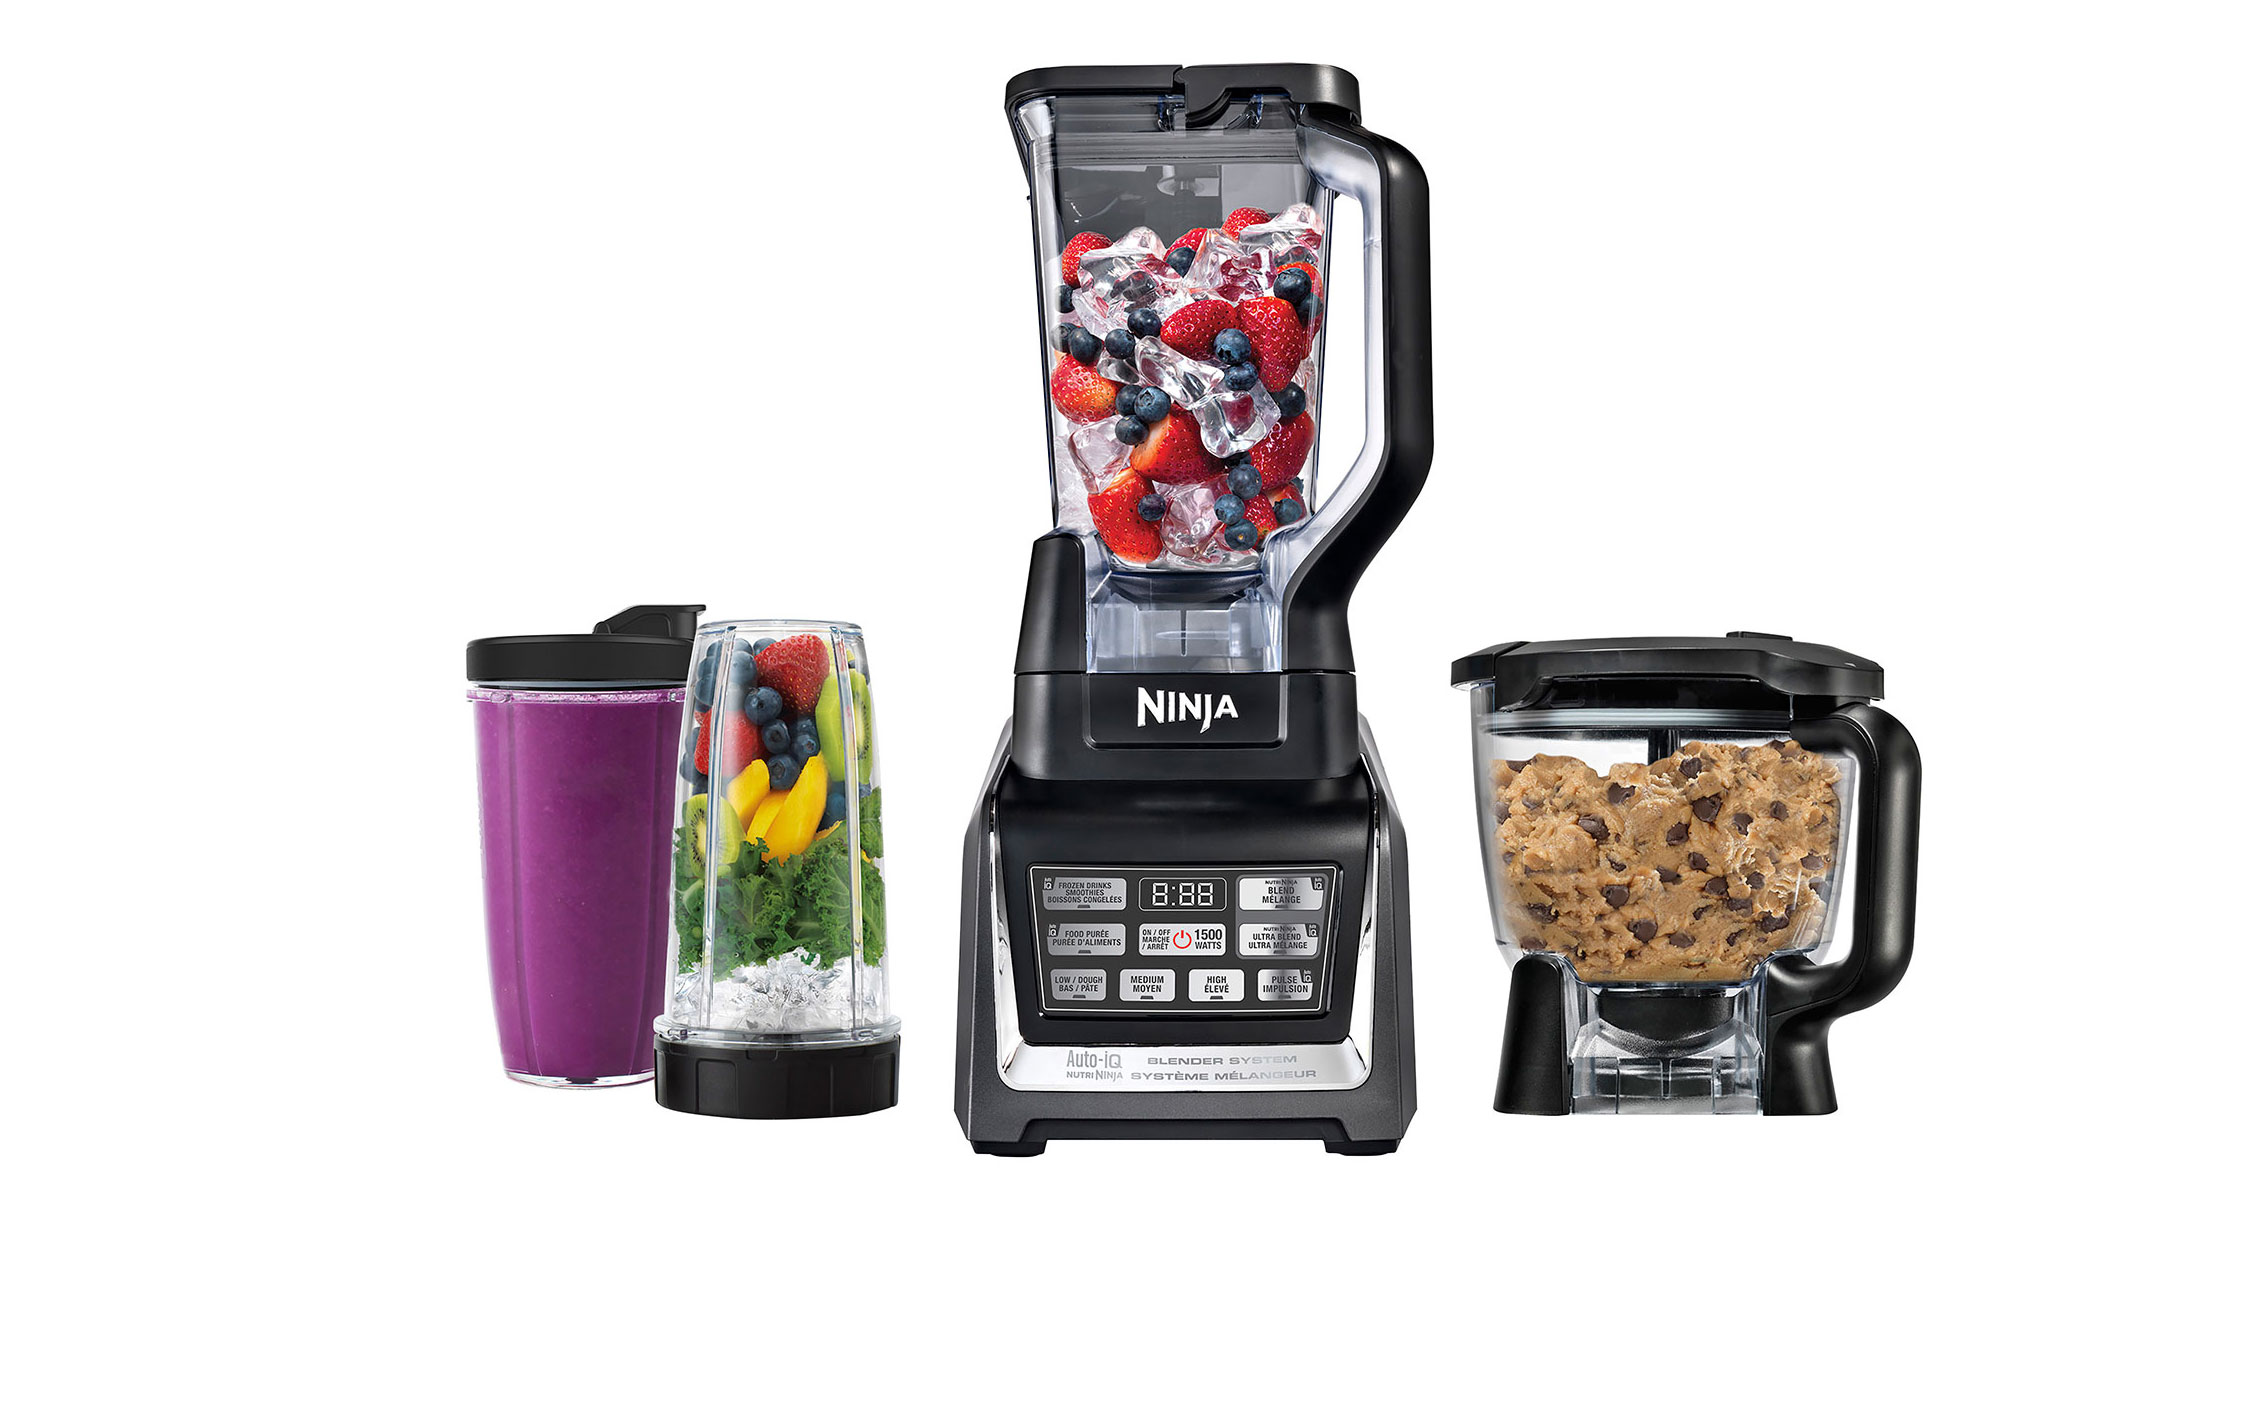 Amazing Ninja Blender now available at Best Buy